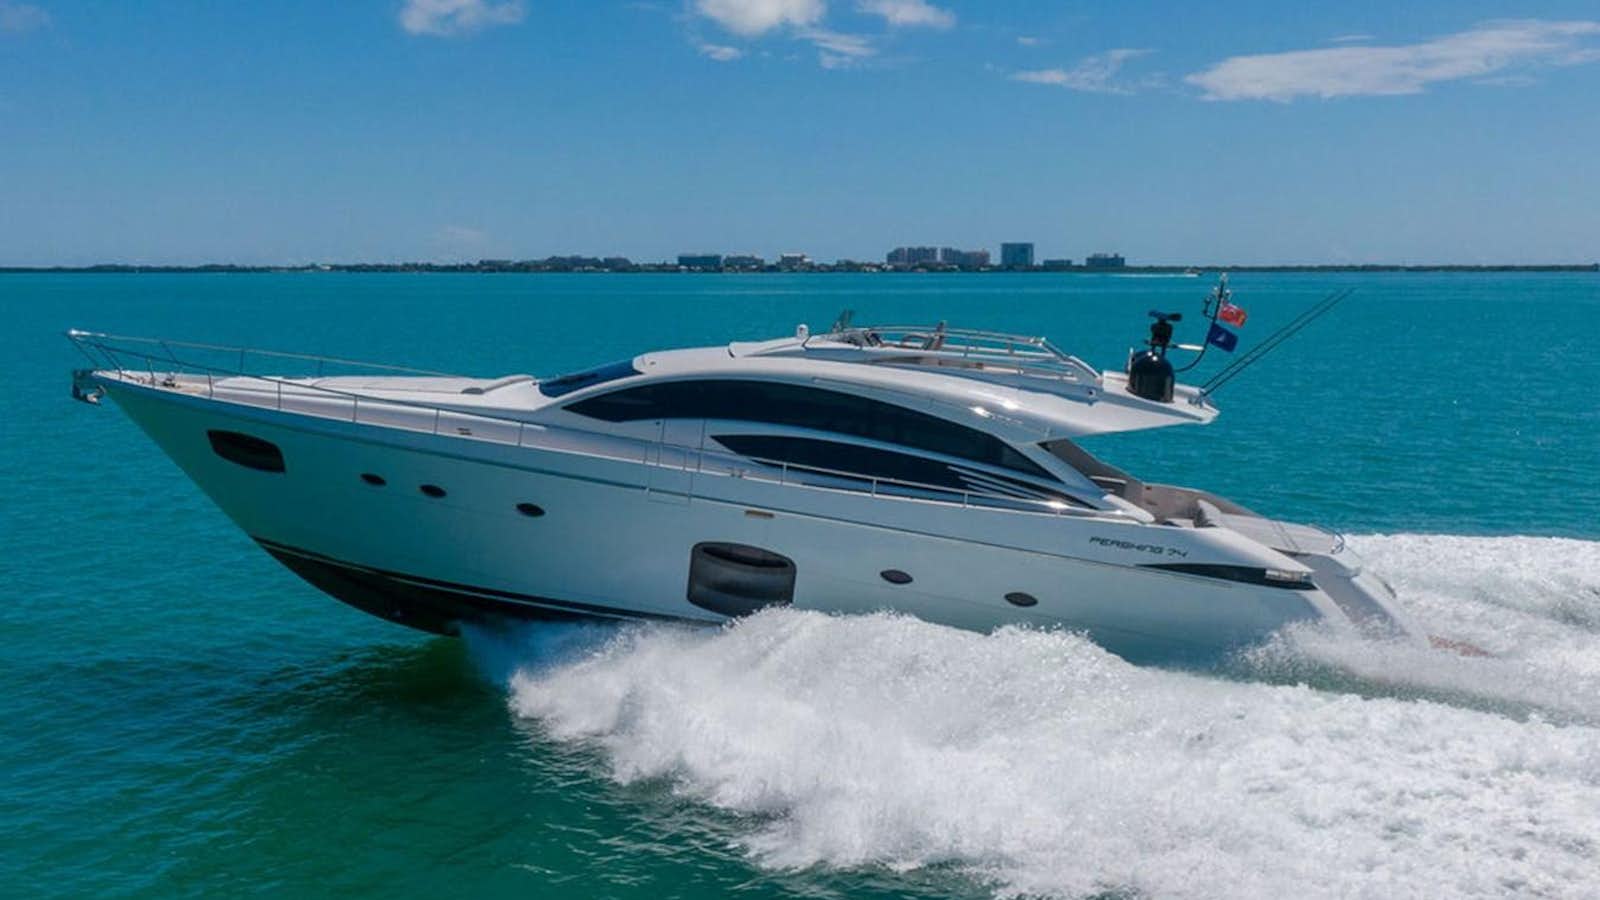 Watch Video for VIDI Yacht for Sale